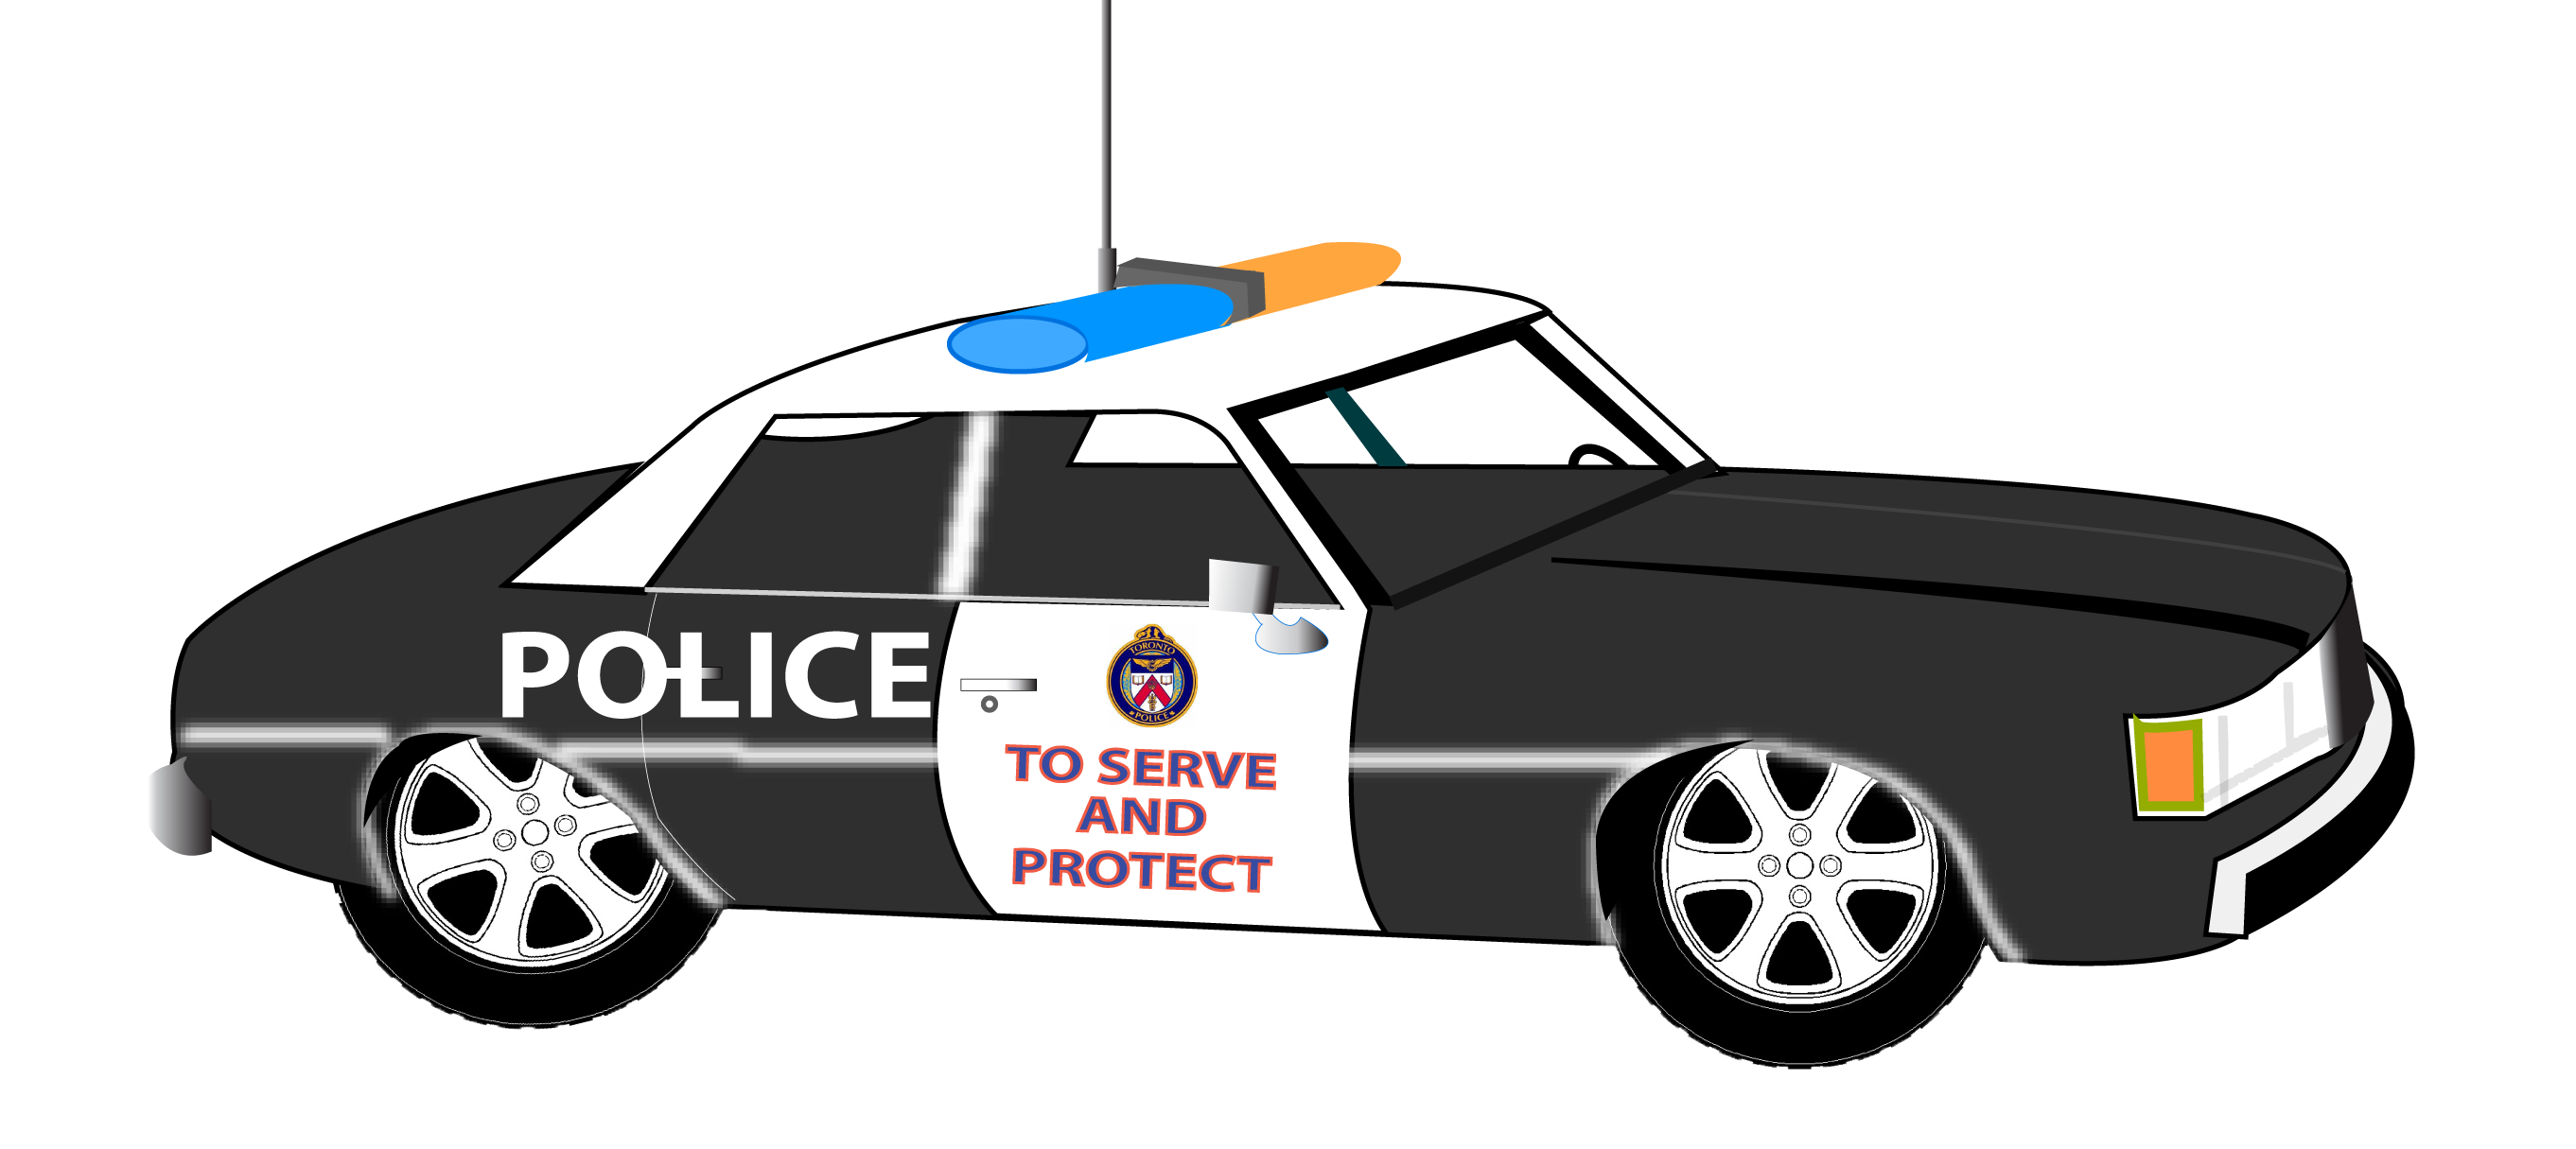 Police Images For Free Download Clipart